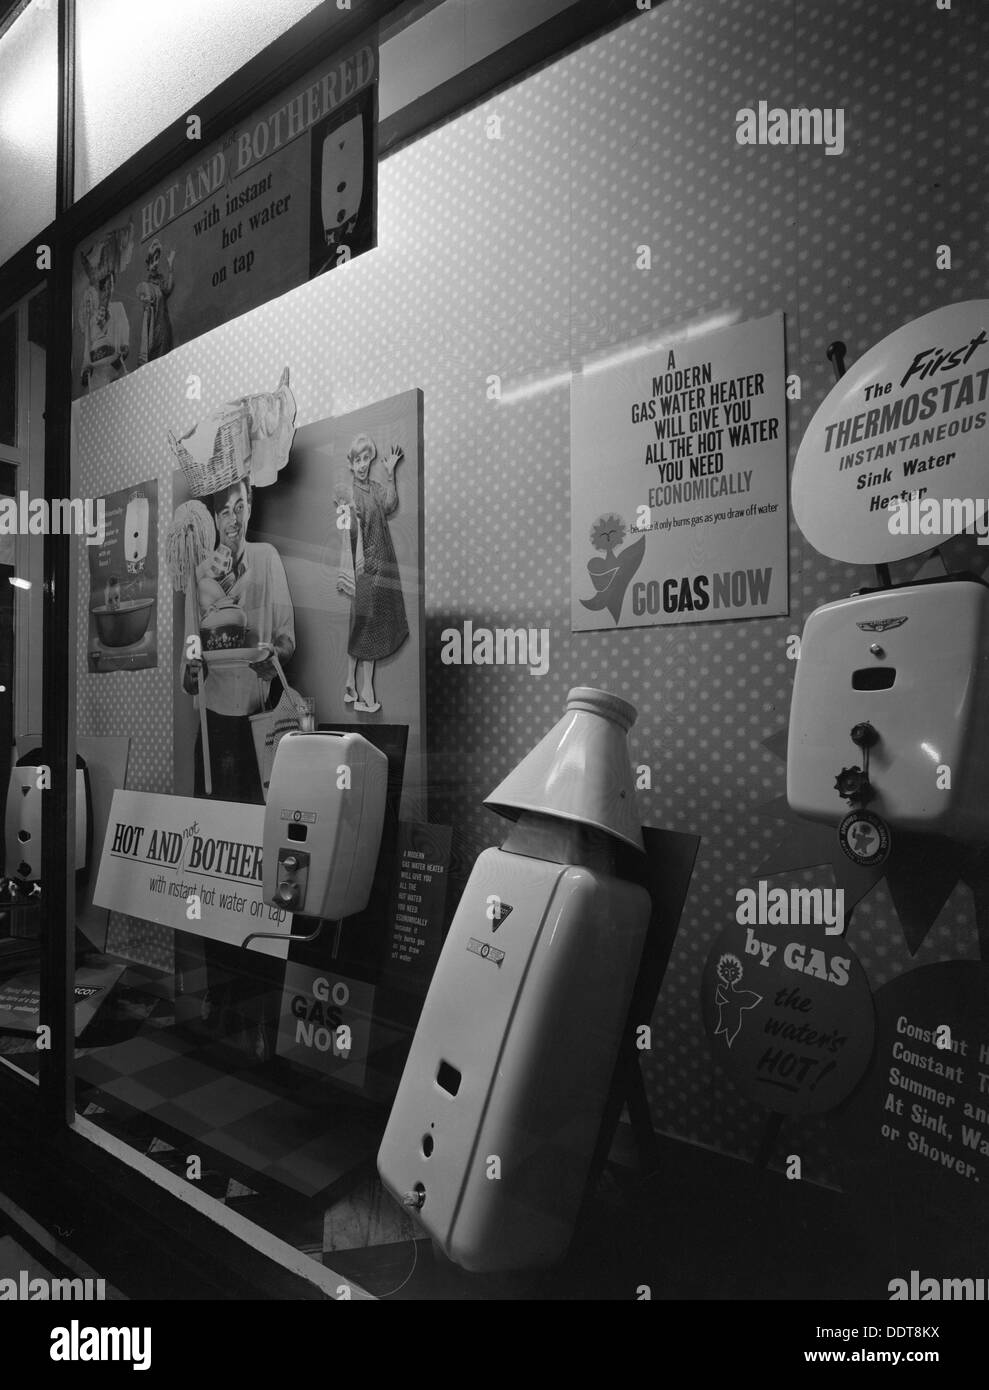 Gas water heaters display, East Midlands Gas Board showroom, Rotherham, South Yorkshire, 1961. Artist: Michael Walters Stock Photo